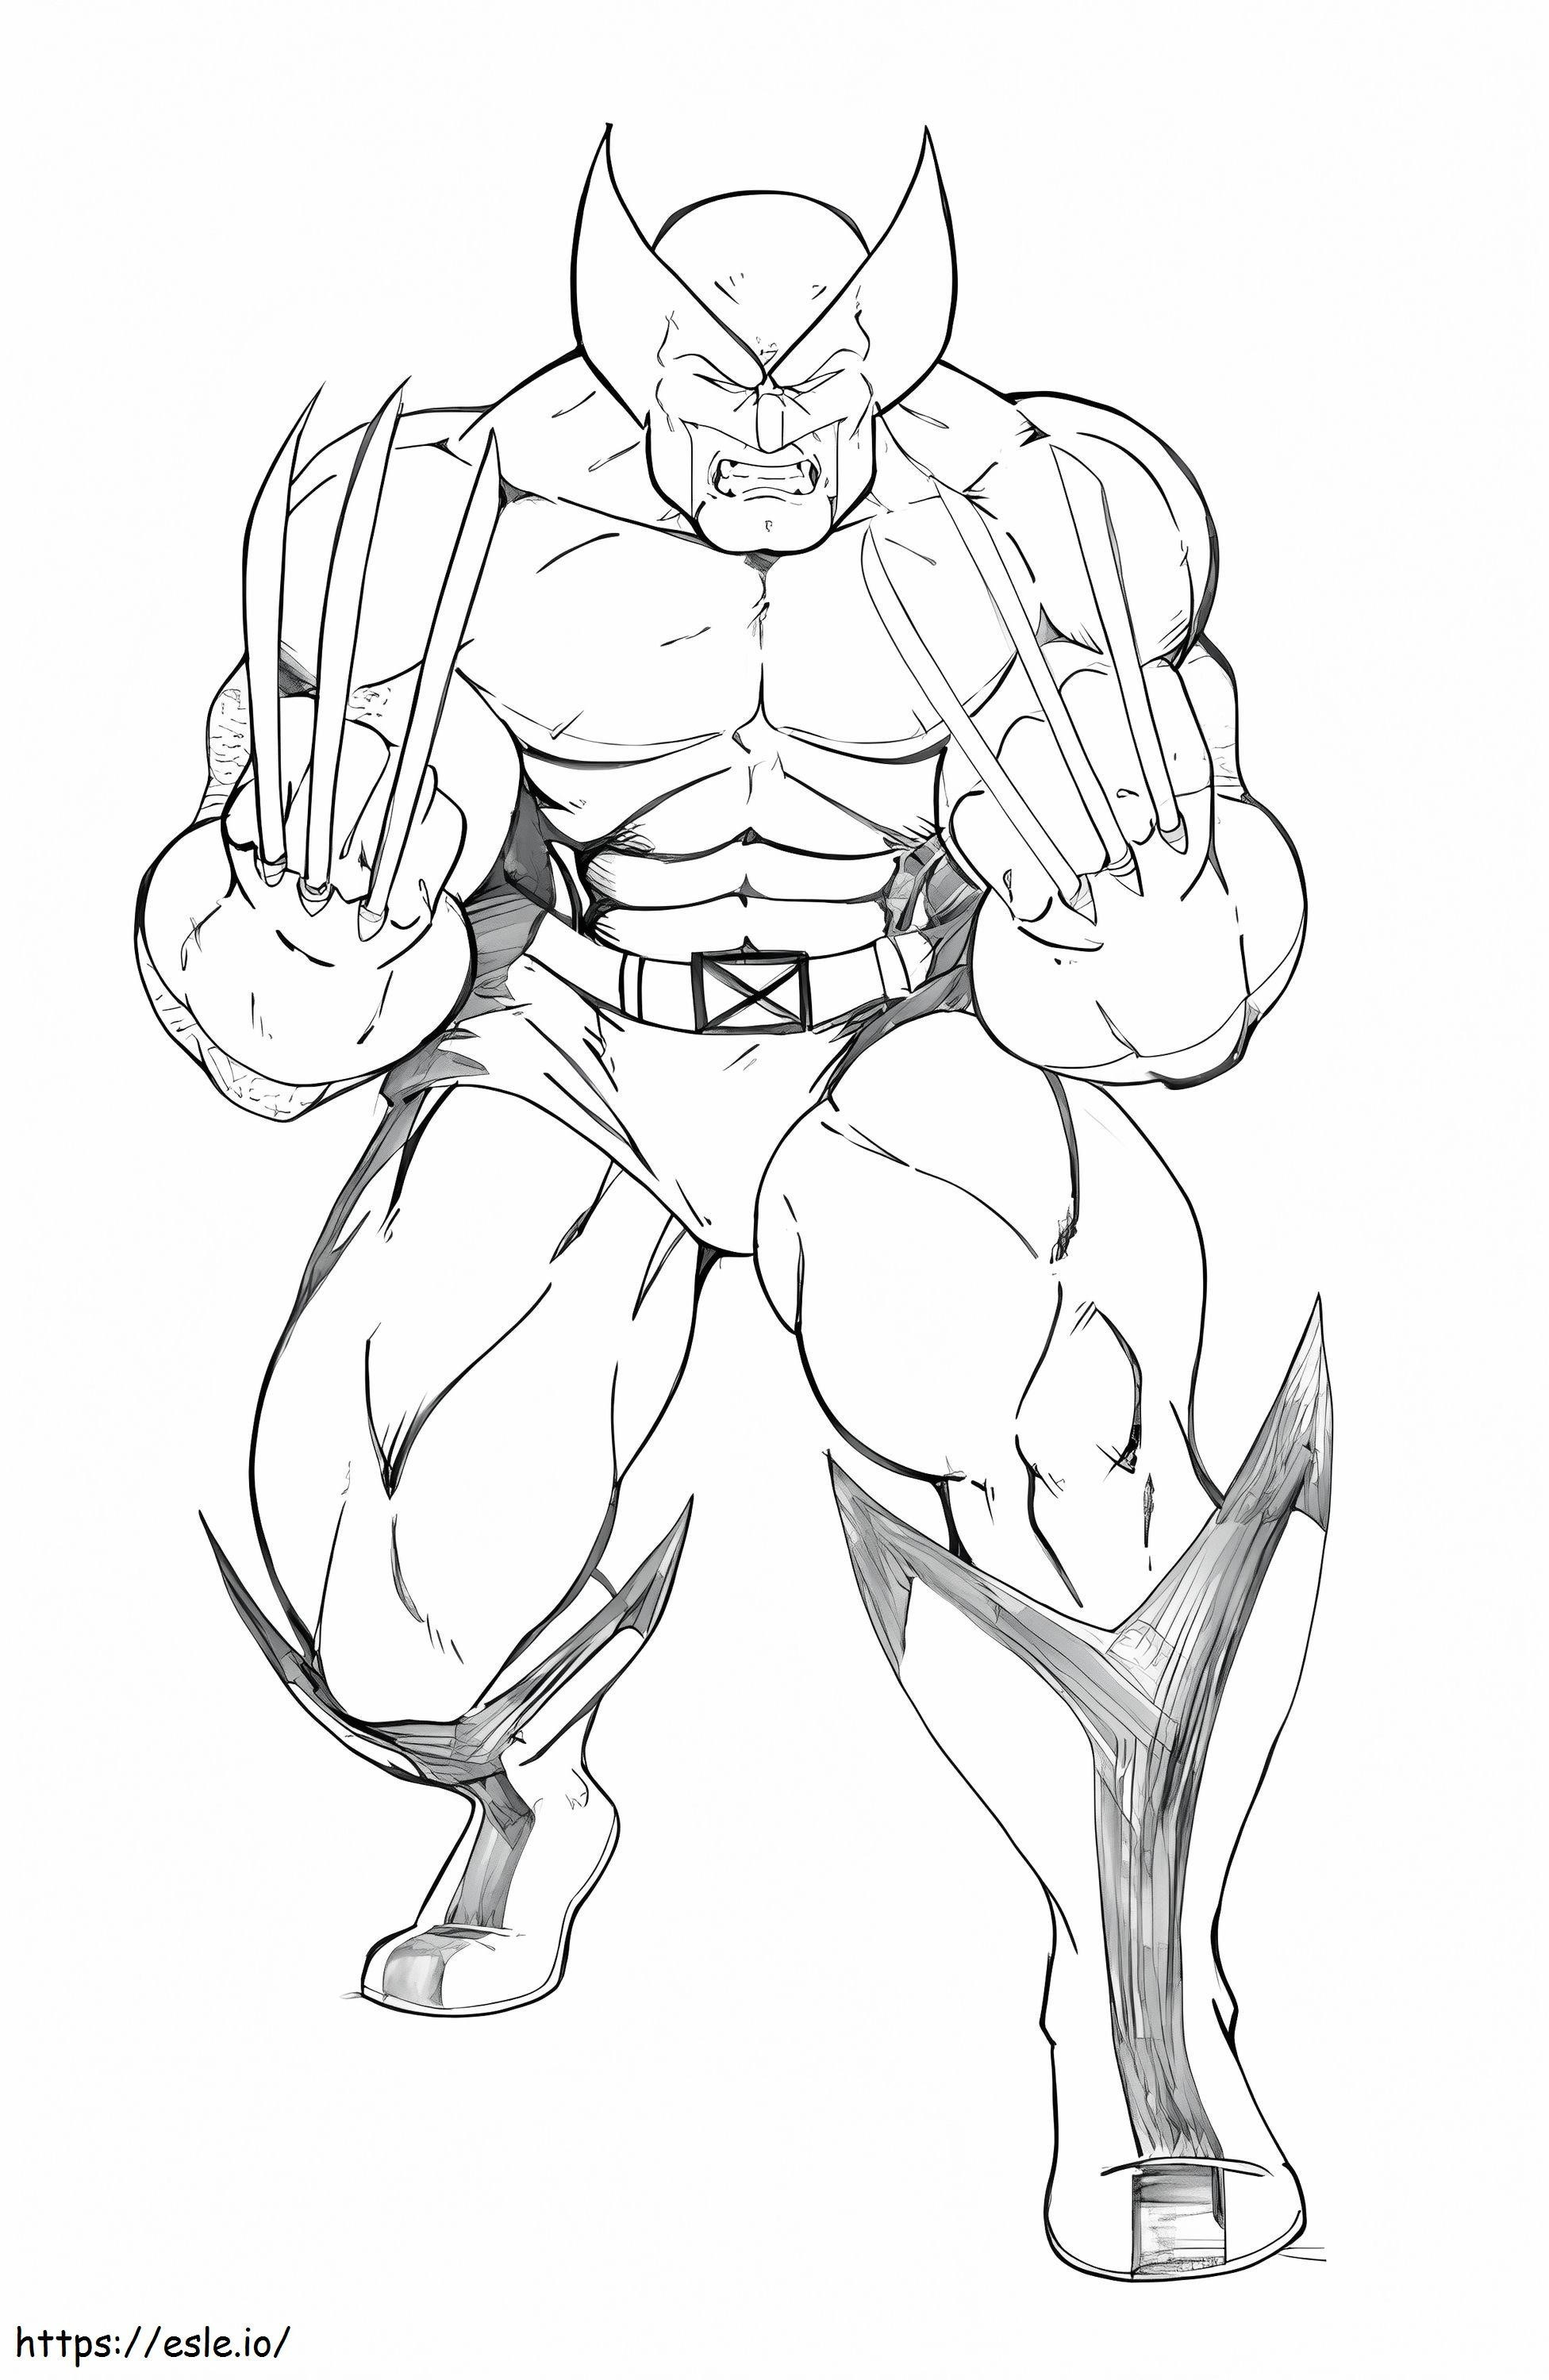 Wolverine 1 coloring page